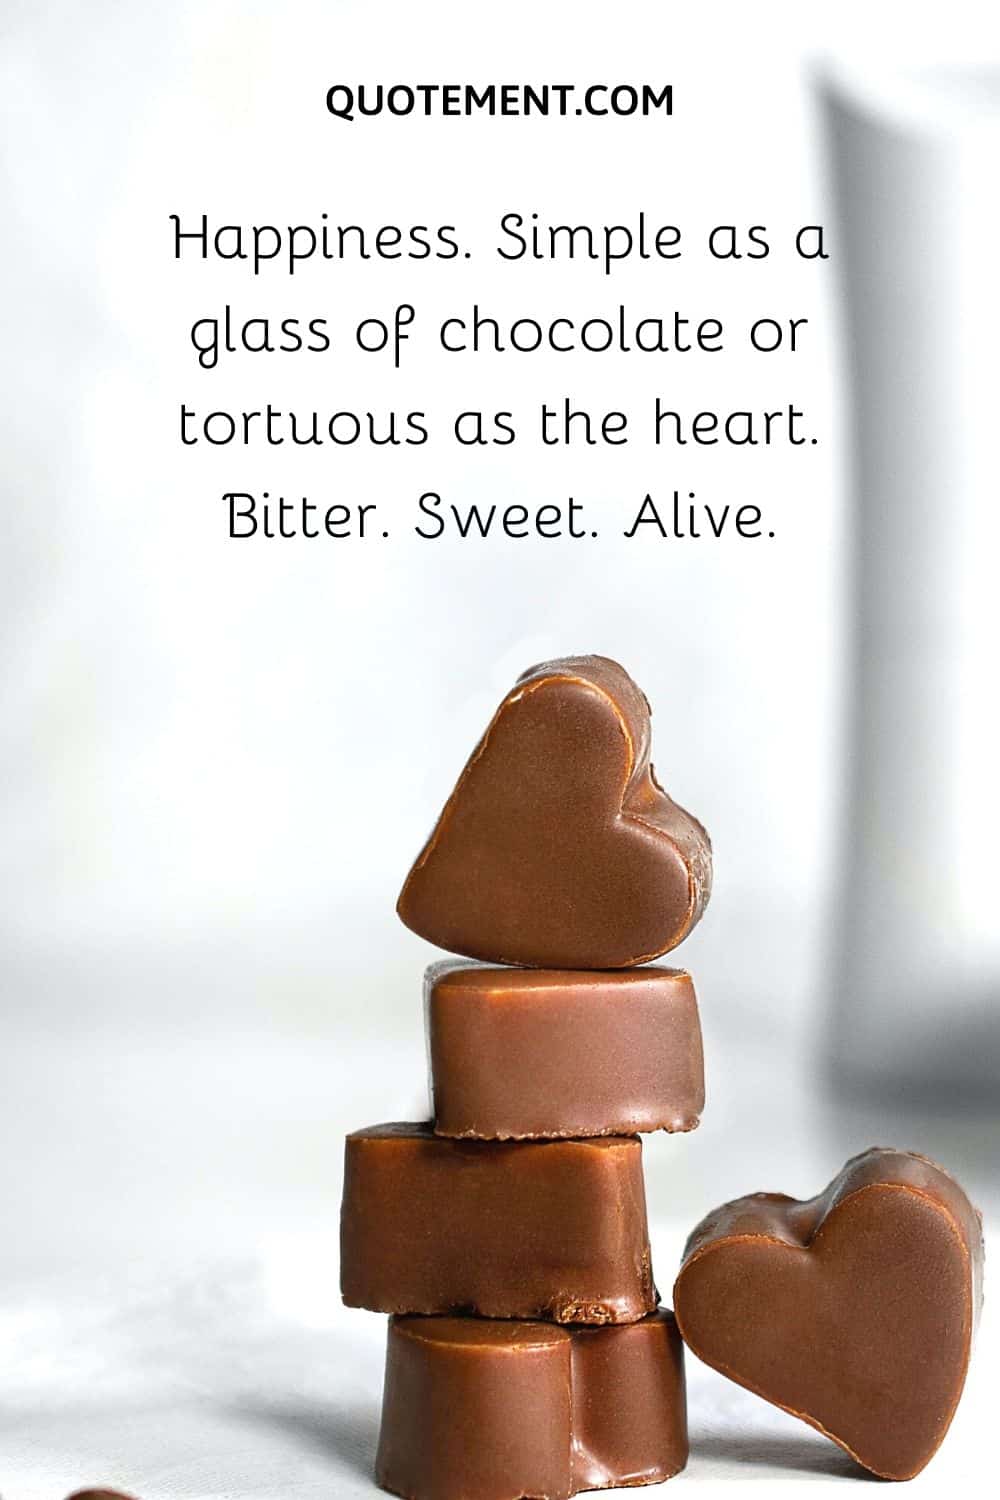 Happiness. Simple as a glass of chocolate or tortuous as the heart. Bitter. Sweet. Alive.